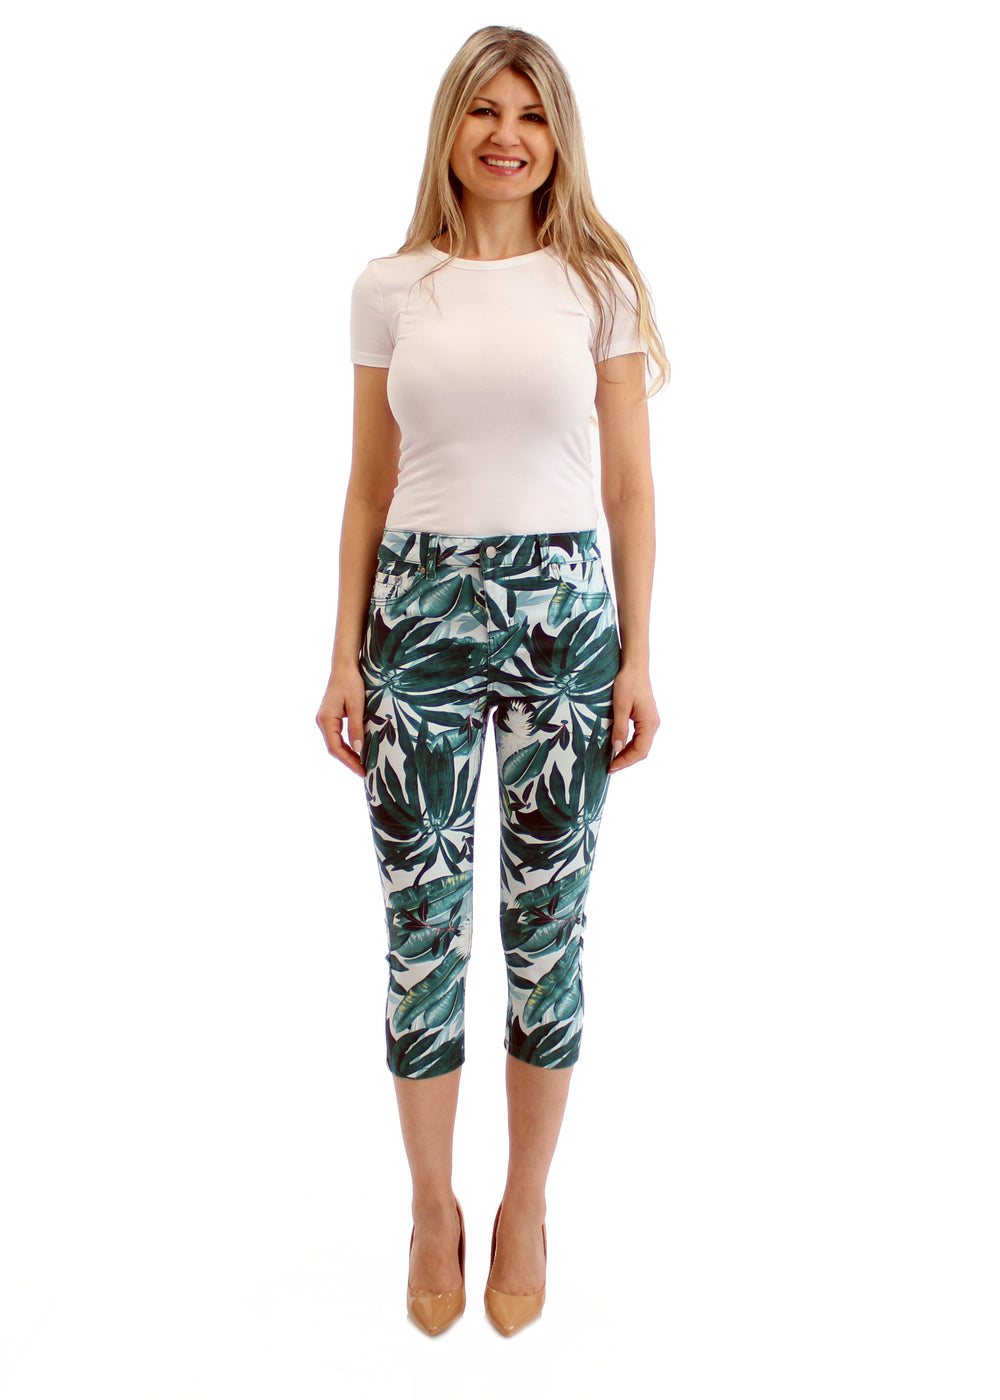 Women's Mid Rise Leaves Printed Stretch Capris